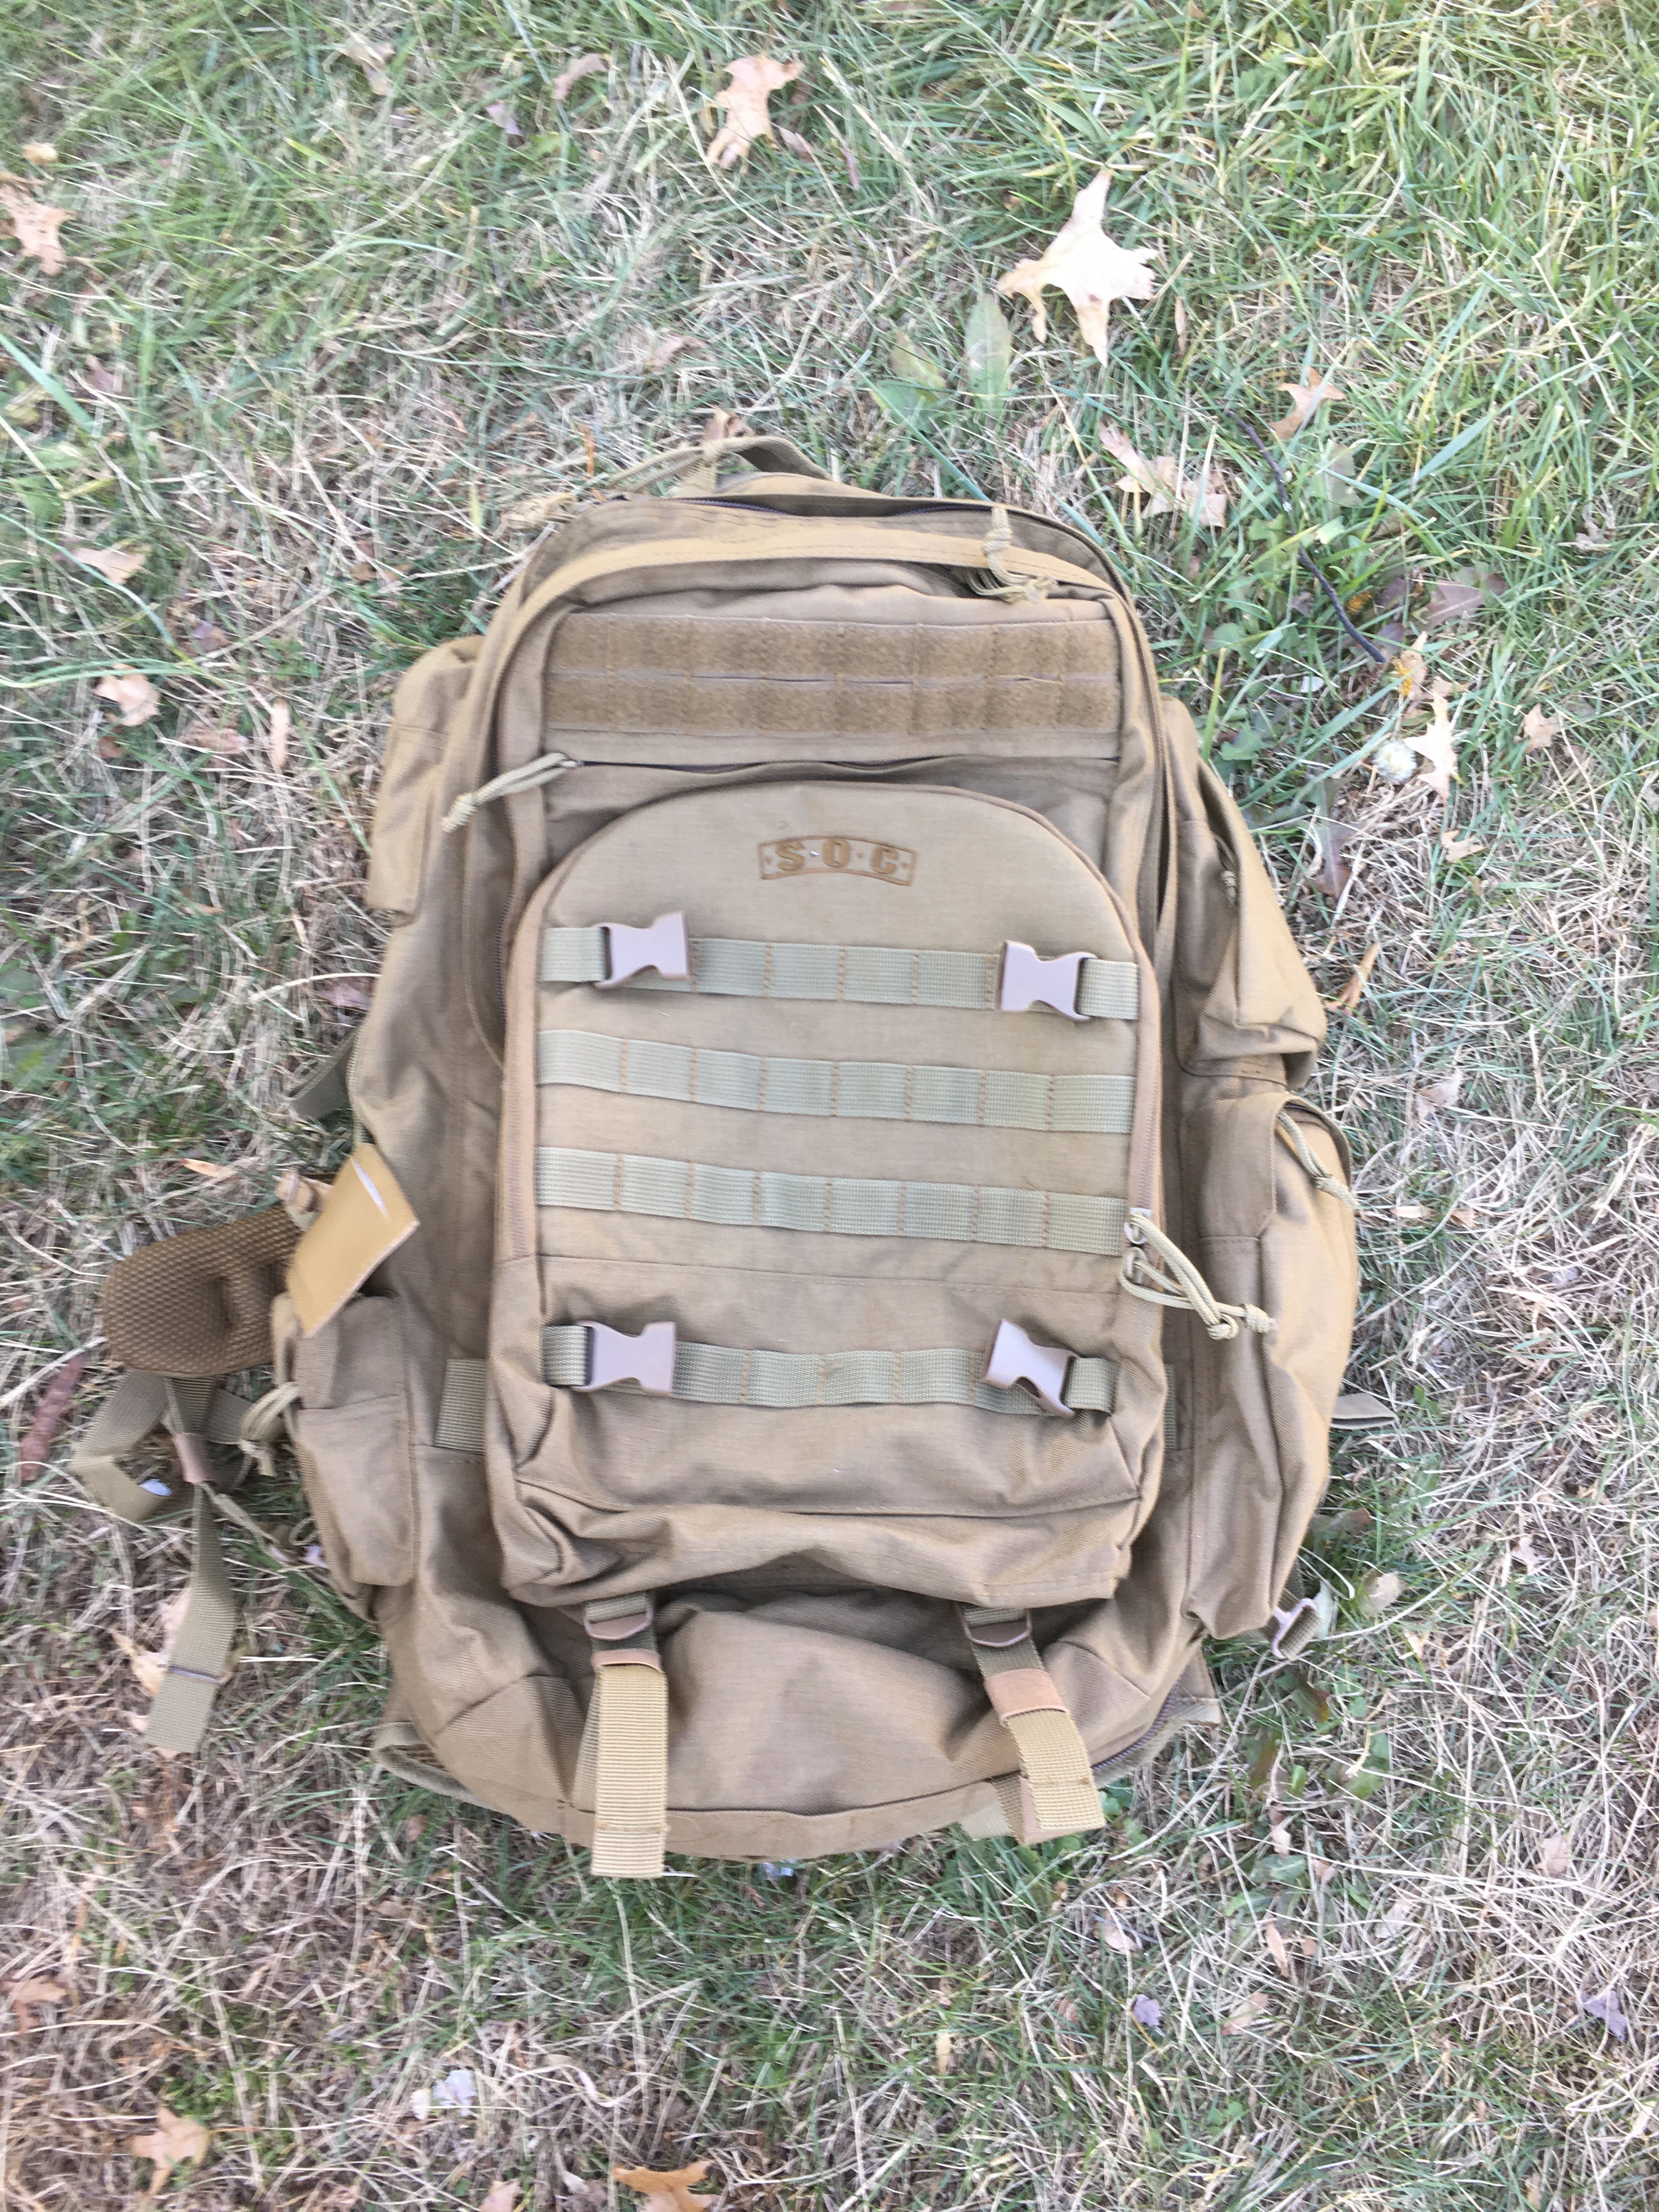 Sandpiper of California Range Bag Product Review • Spotter Up